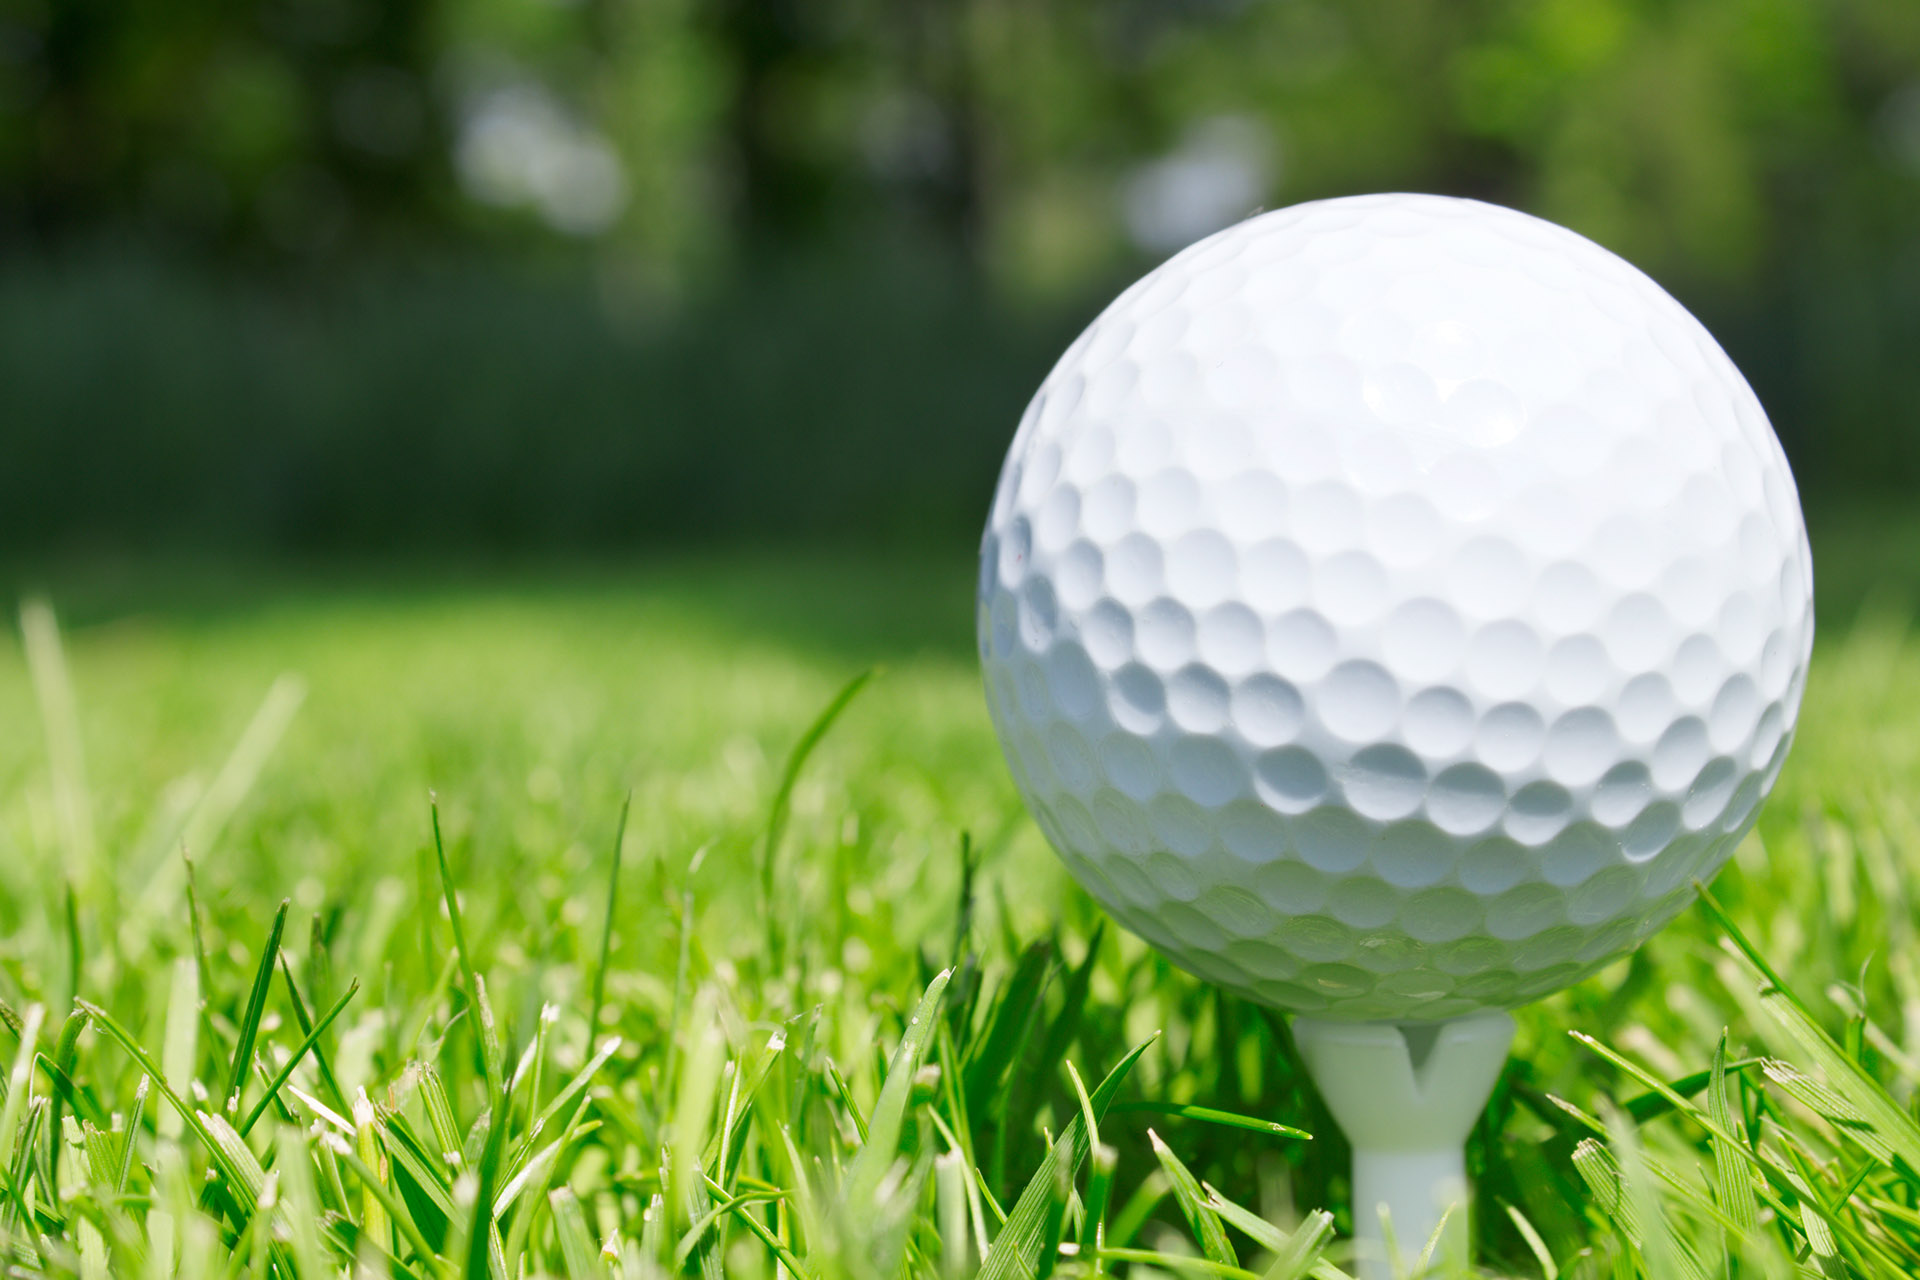 What Are Golf Balls Made Of? â¢ Fairway Friend